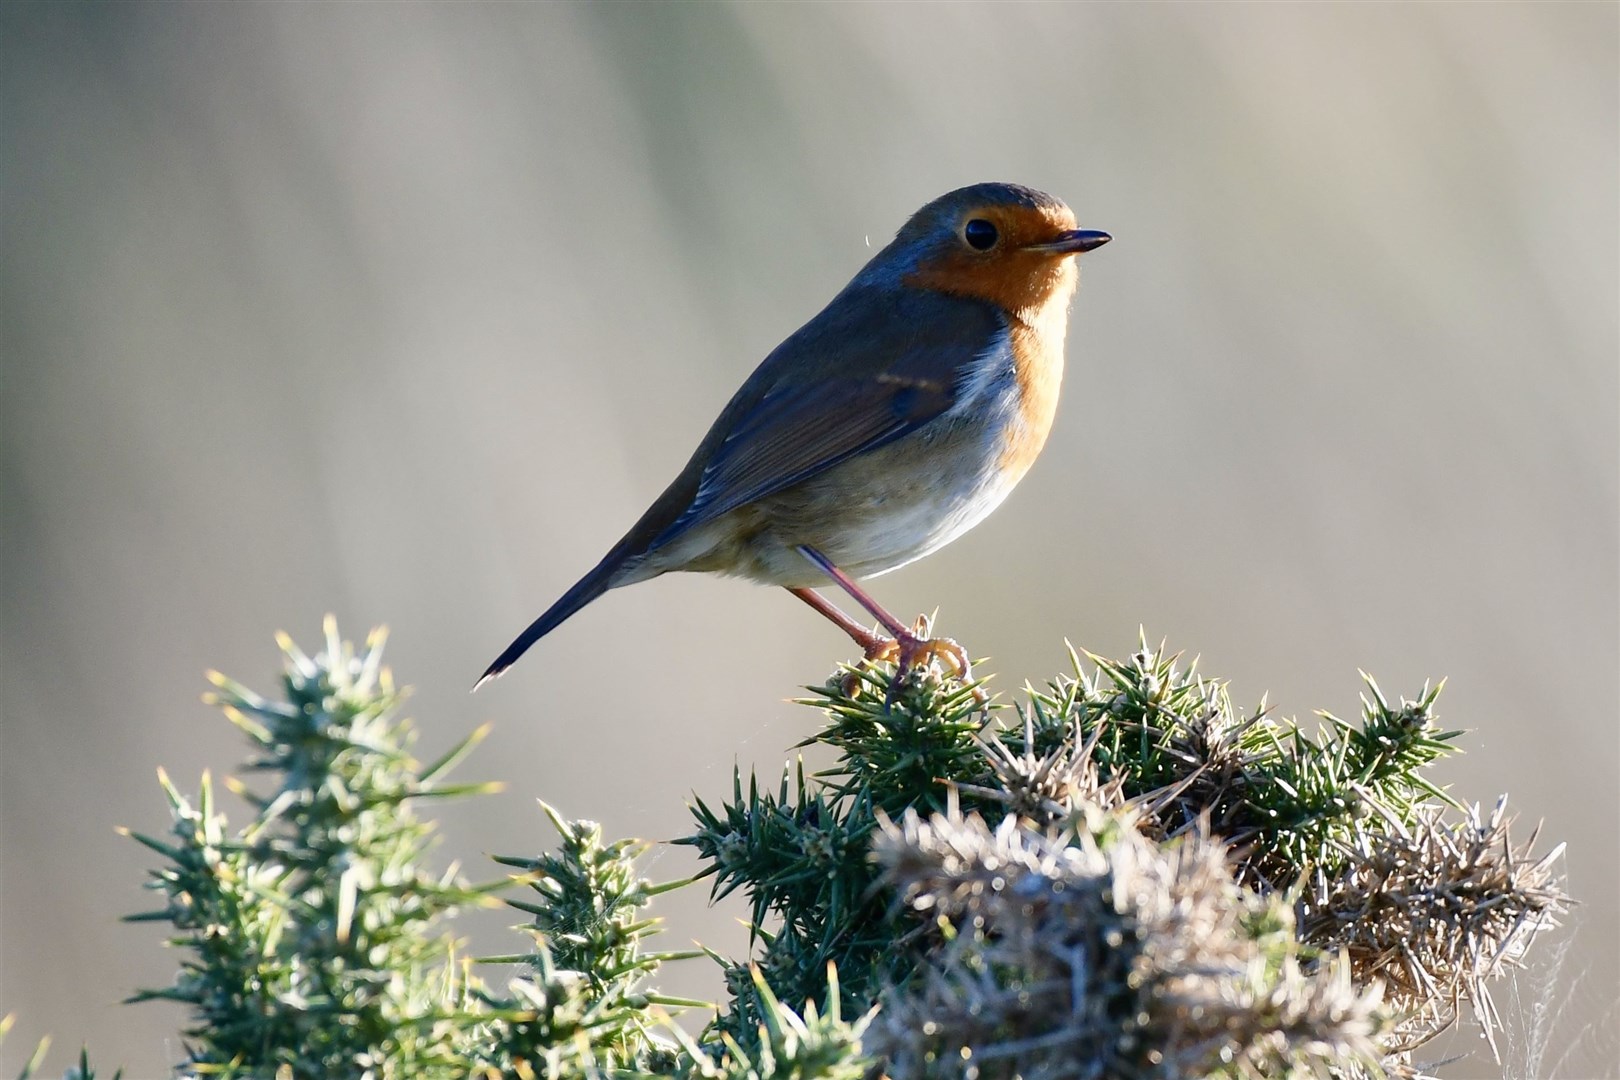 Reader Hazel Thomson spotted this robin while walking along the shore in Burghead.